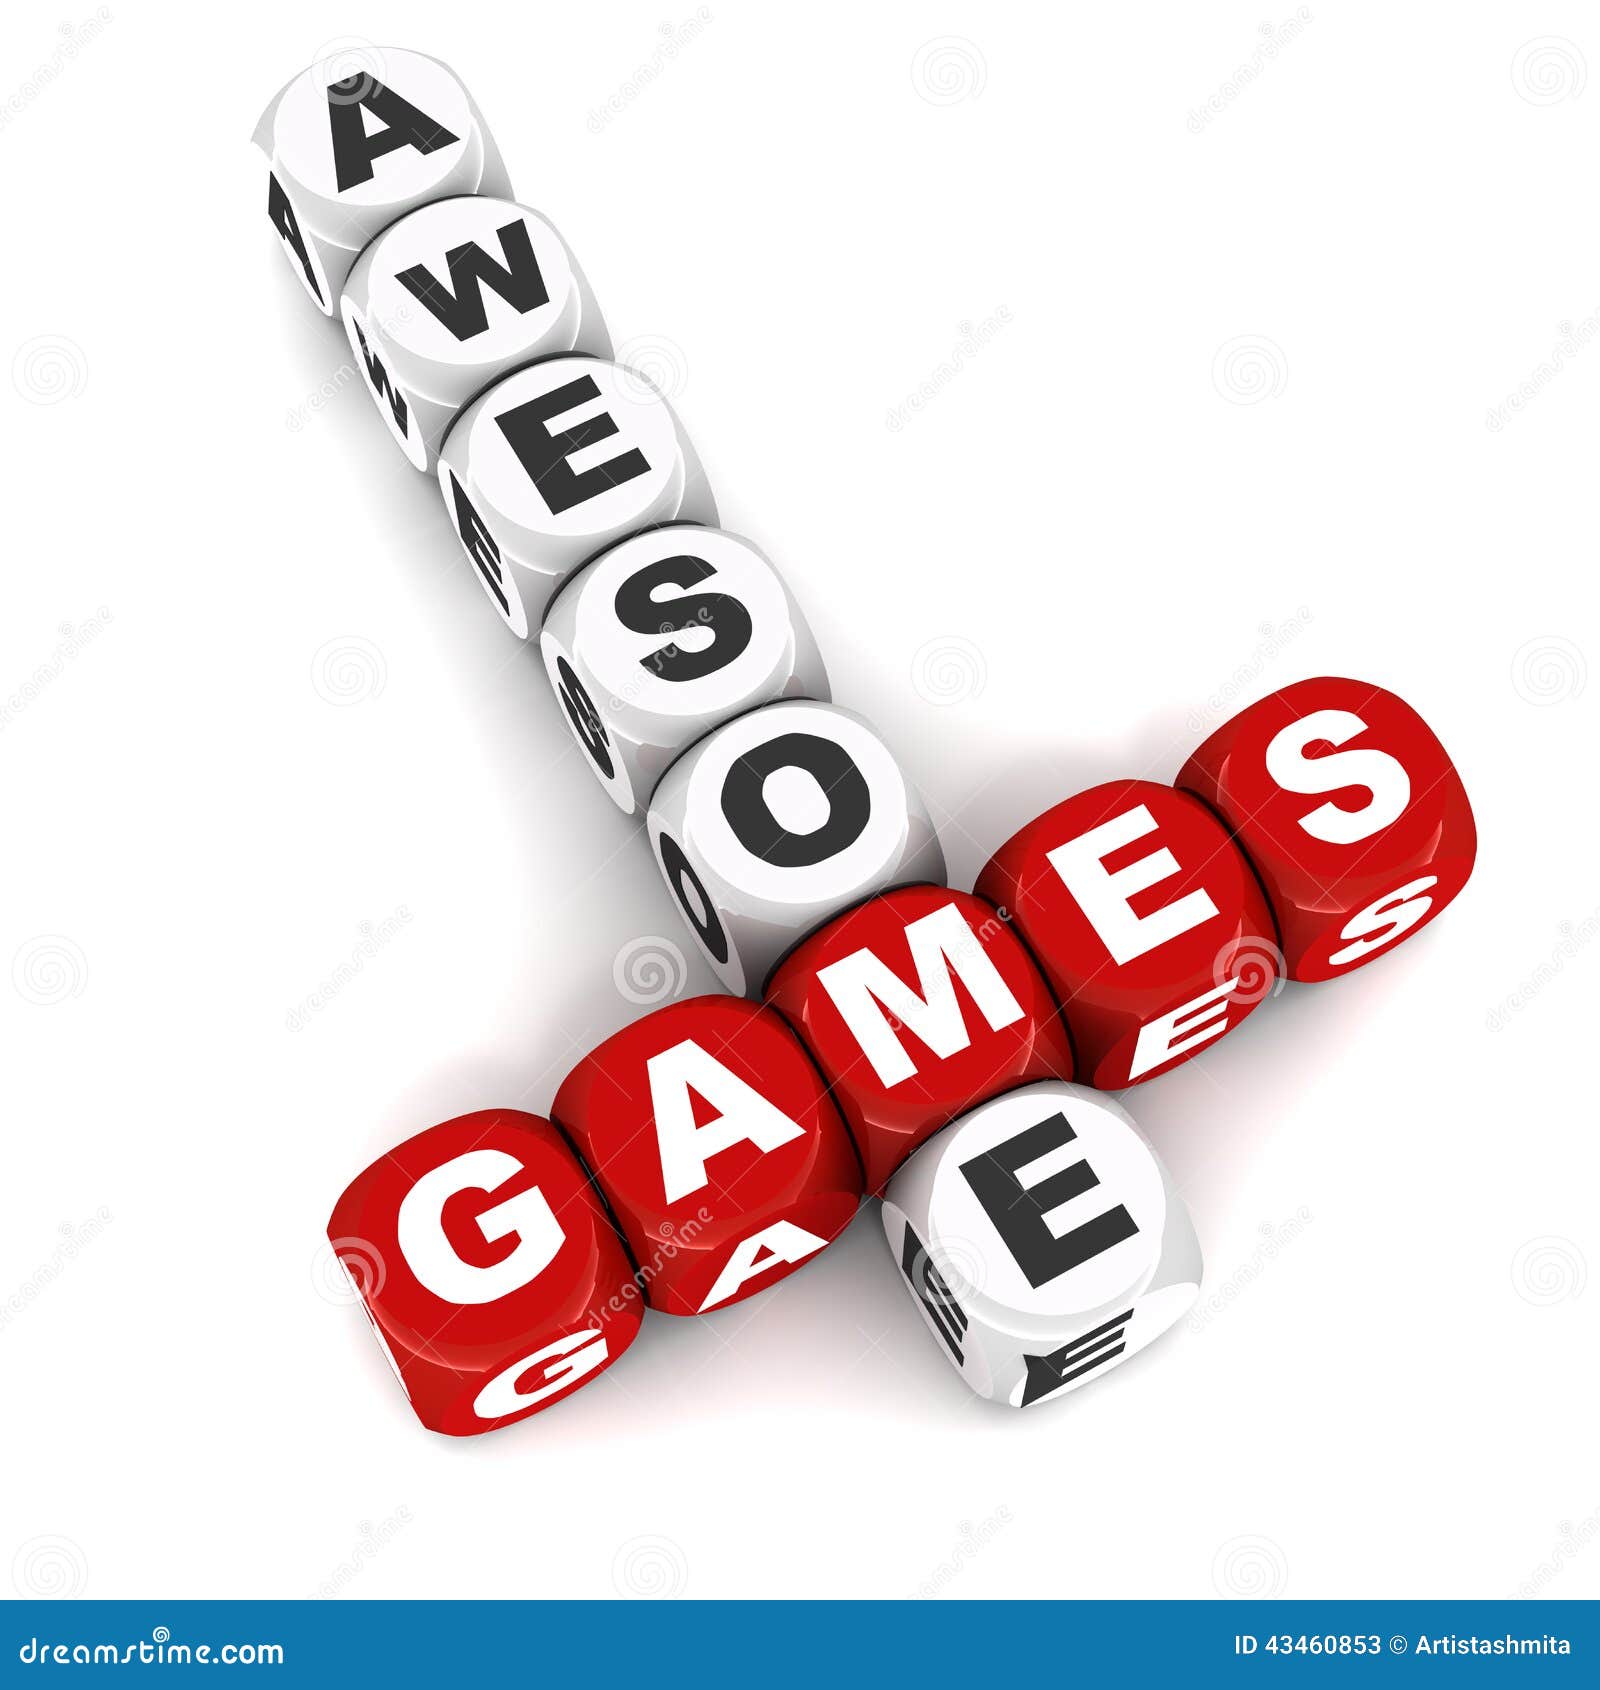 awesome games